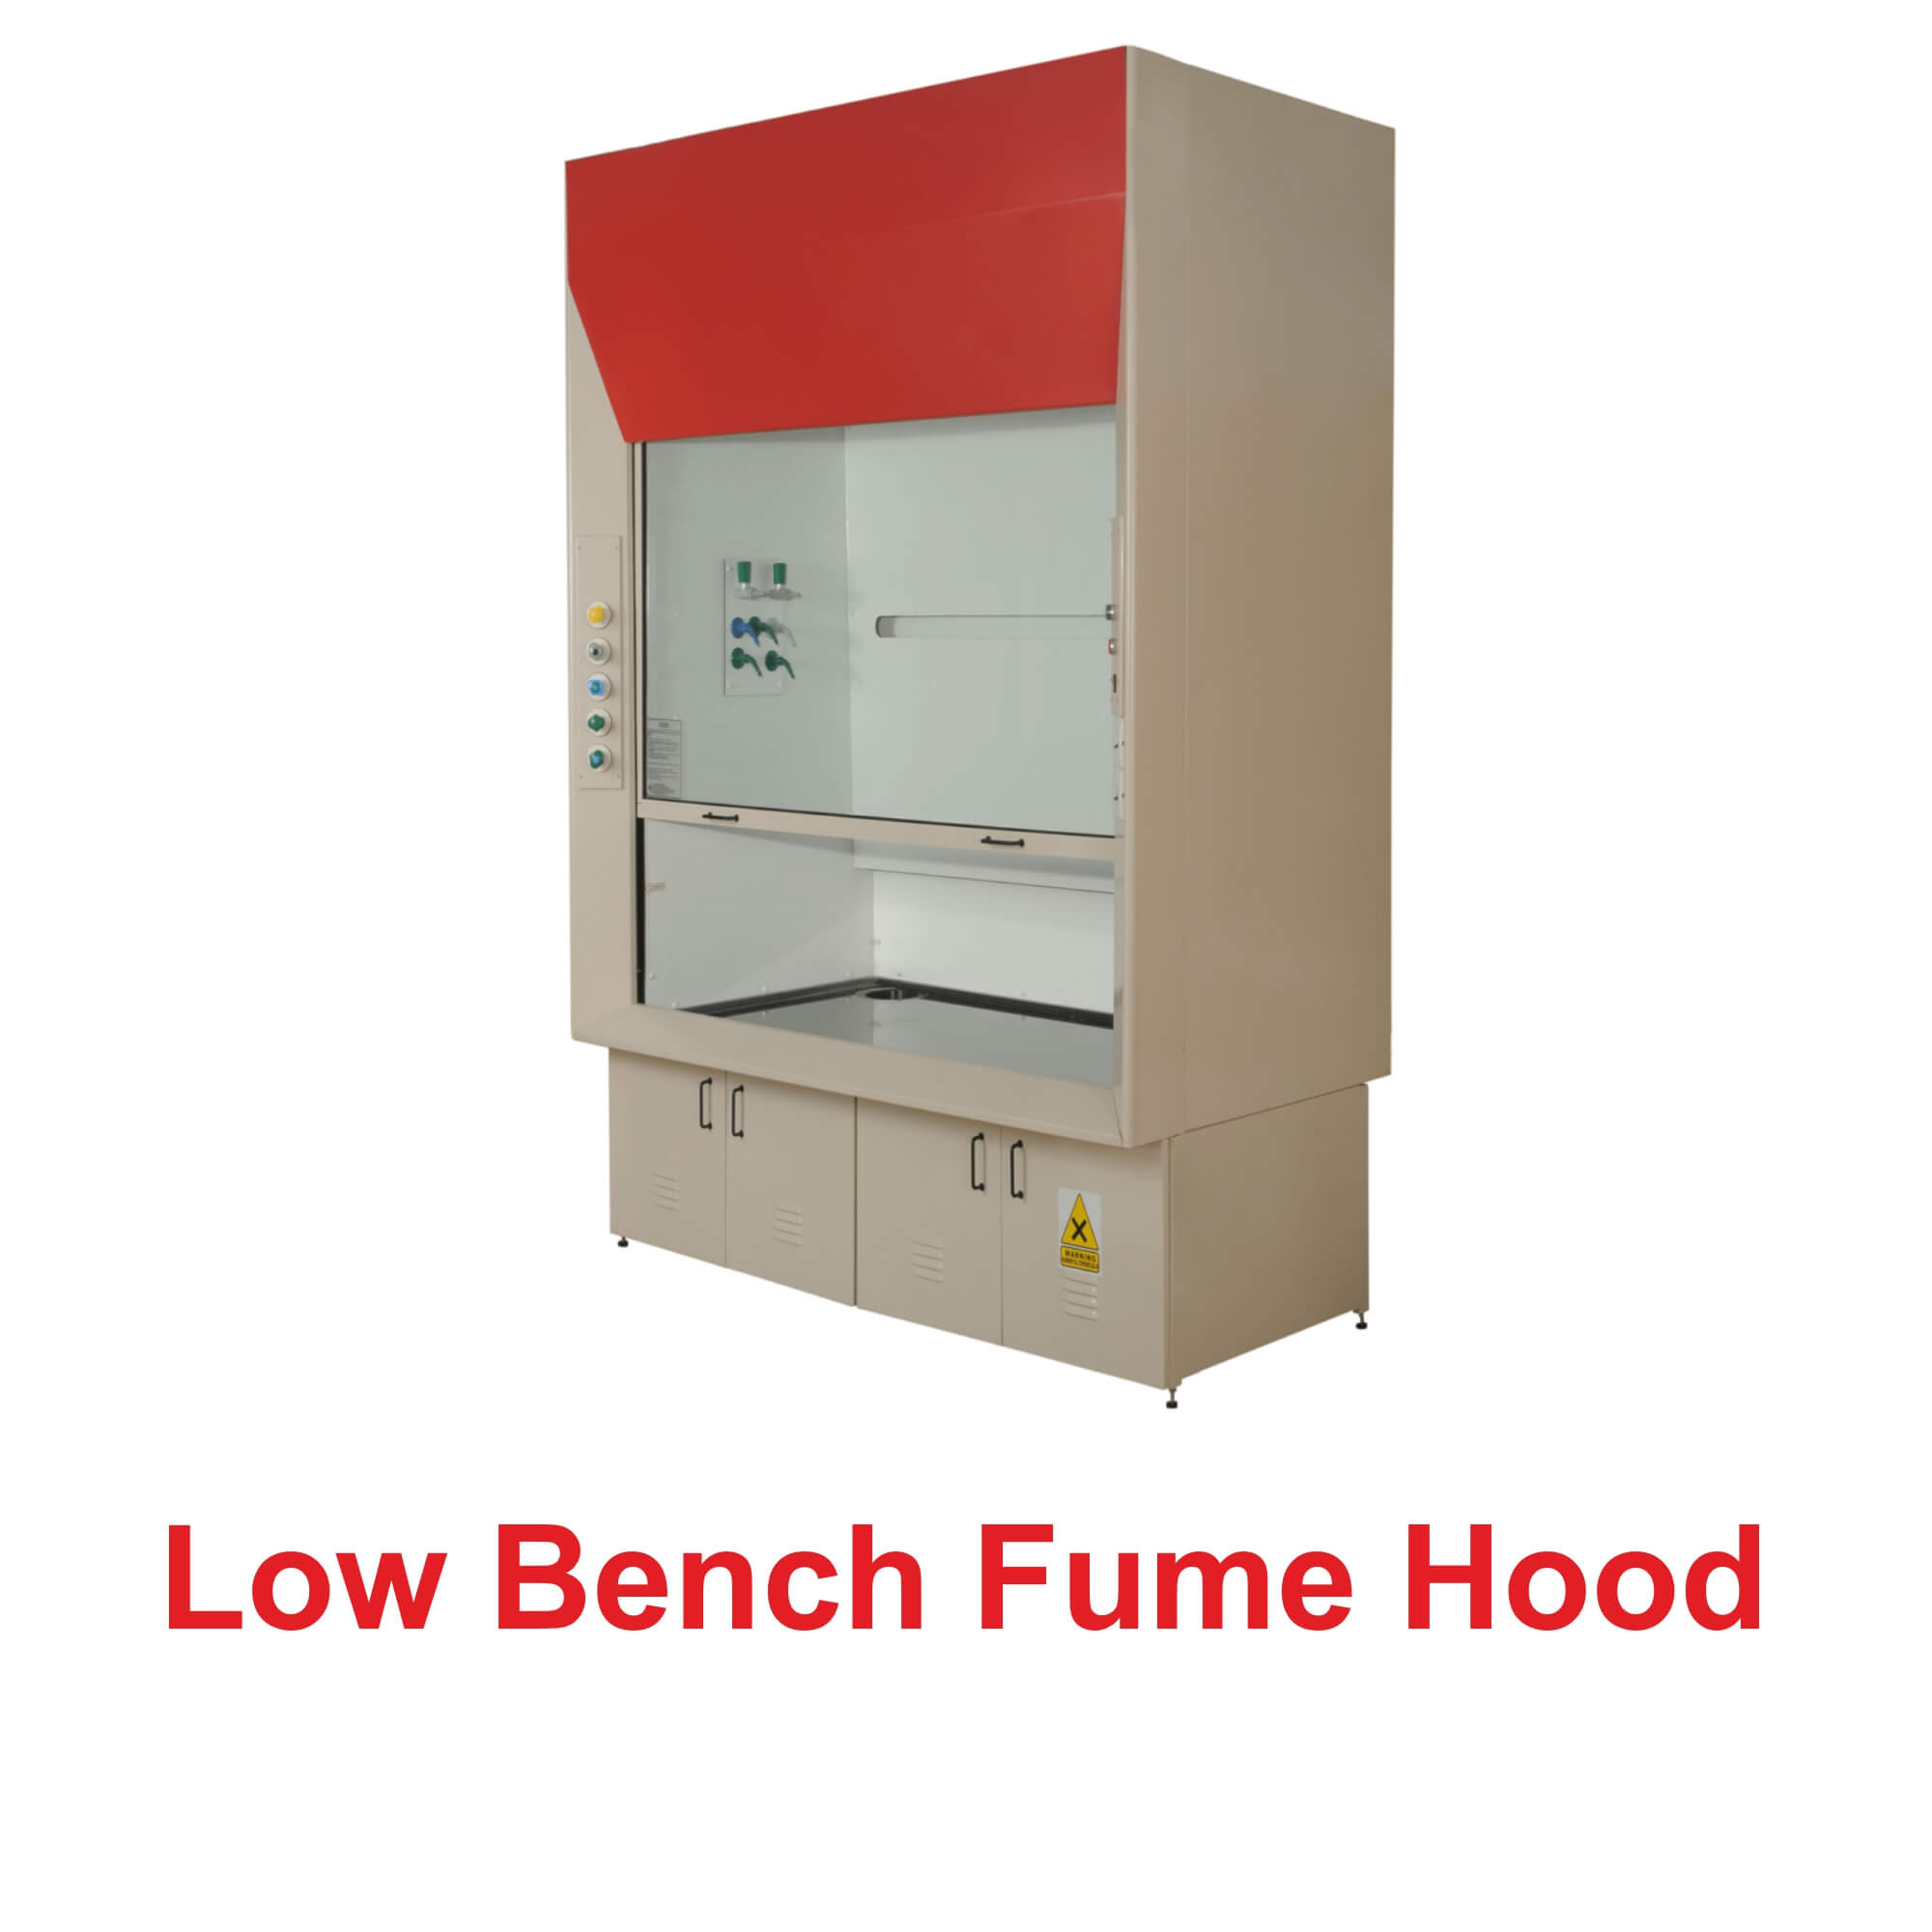 Low Bench Fume Hood Manufacturer in India